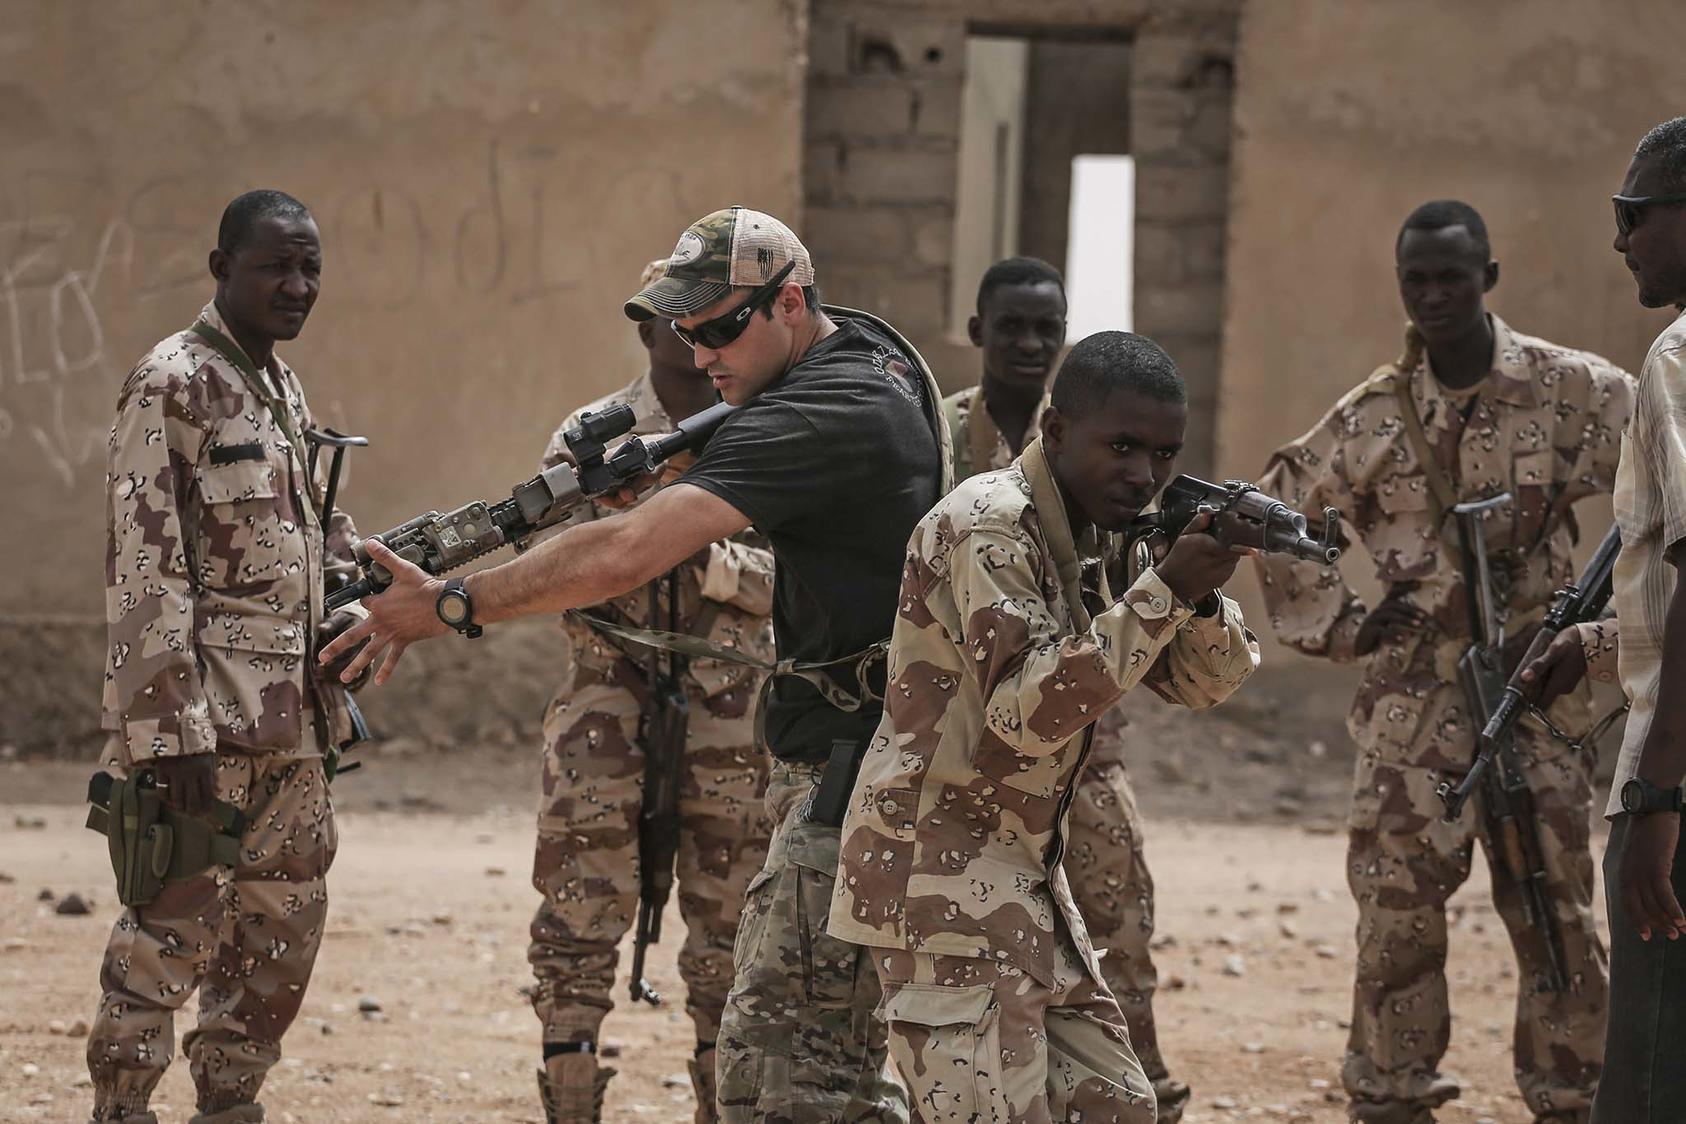 U.S. Special Forces soldiers train Nigerien forces in Agadez, Niger, April 12, 2018. (Tara Todras-Whitehill/The New York Times)